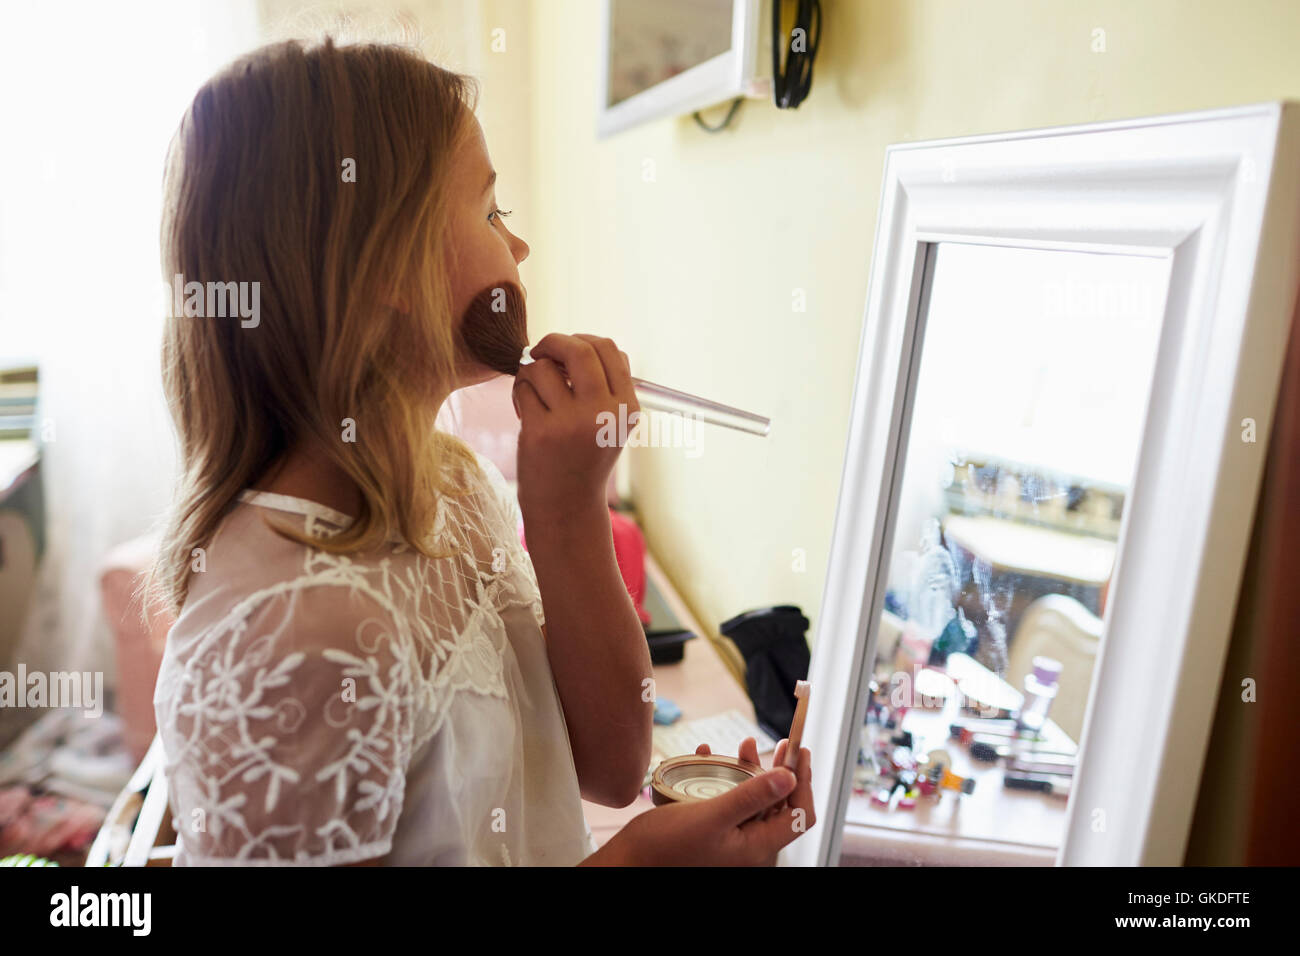 Young Girl Dressing Up And Putting On Mother's Make Up Stock Photo